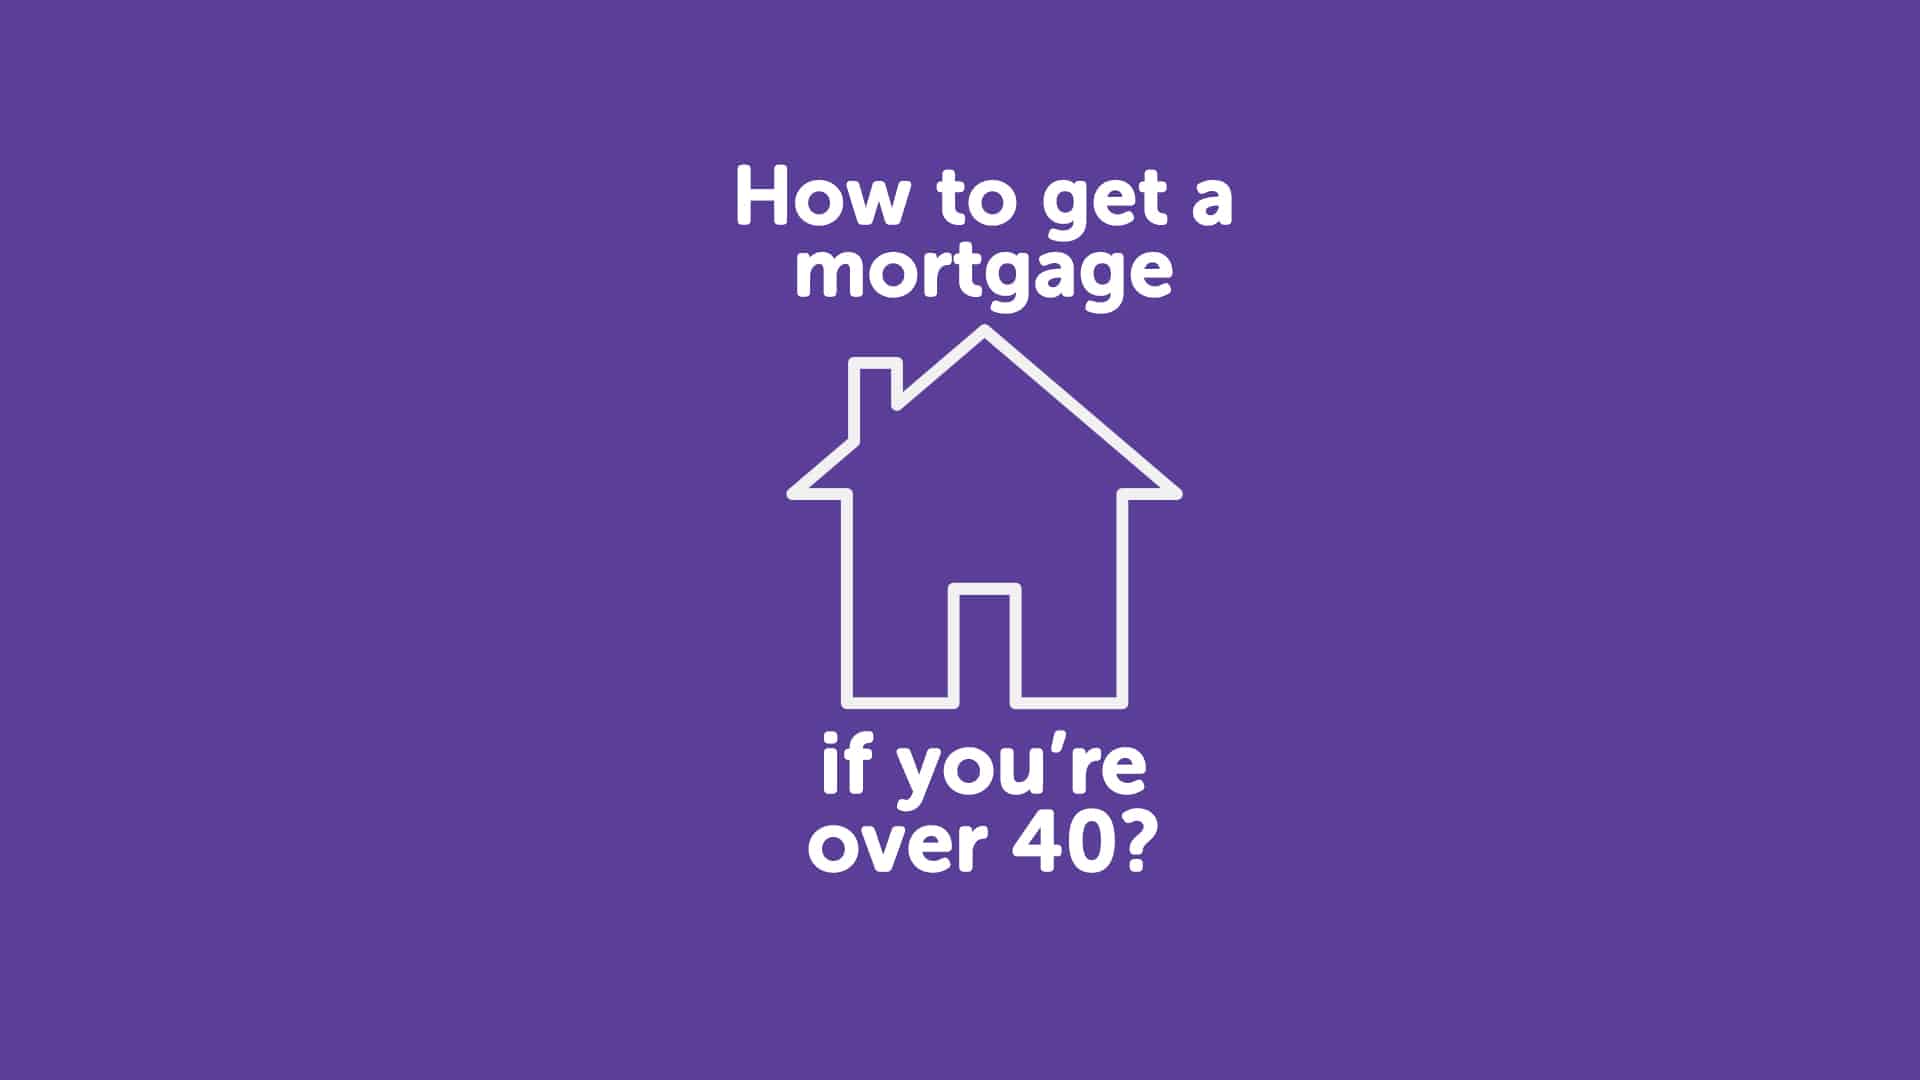 How to Get a Mortgage in Harrogate if You're Over 40